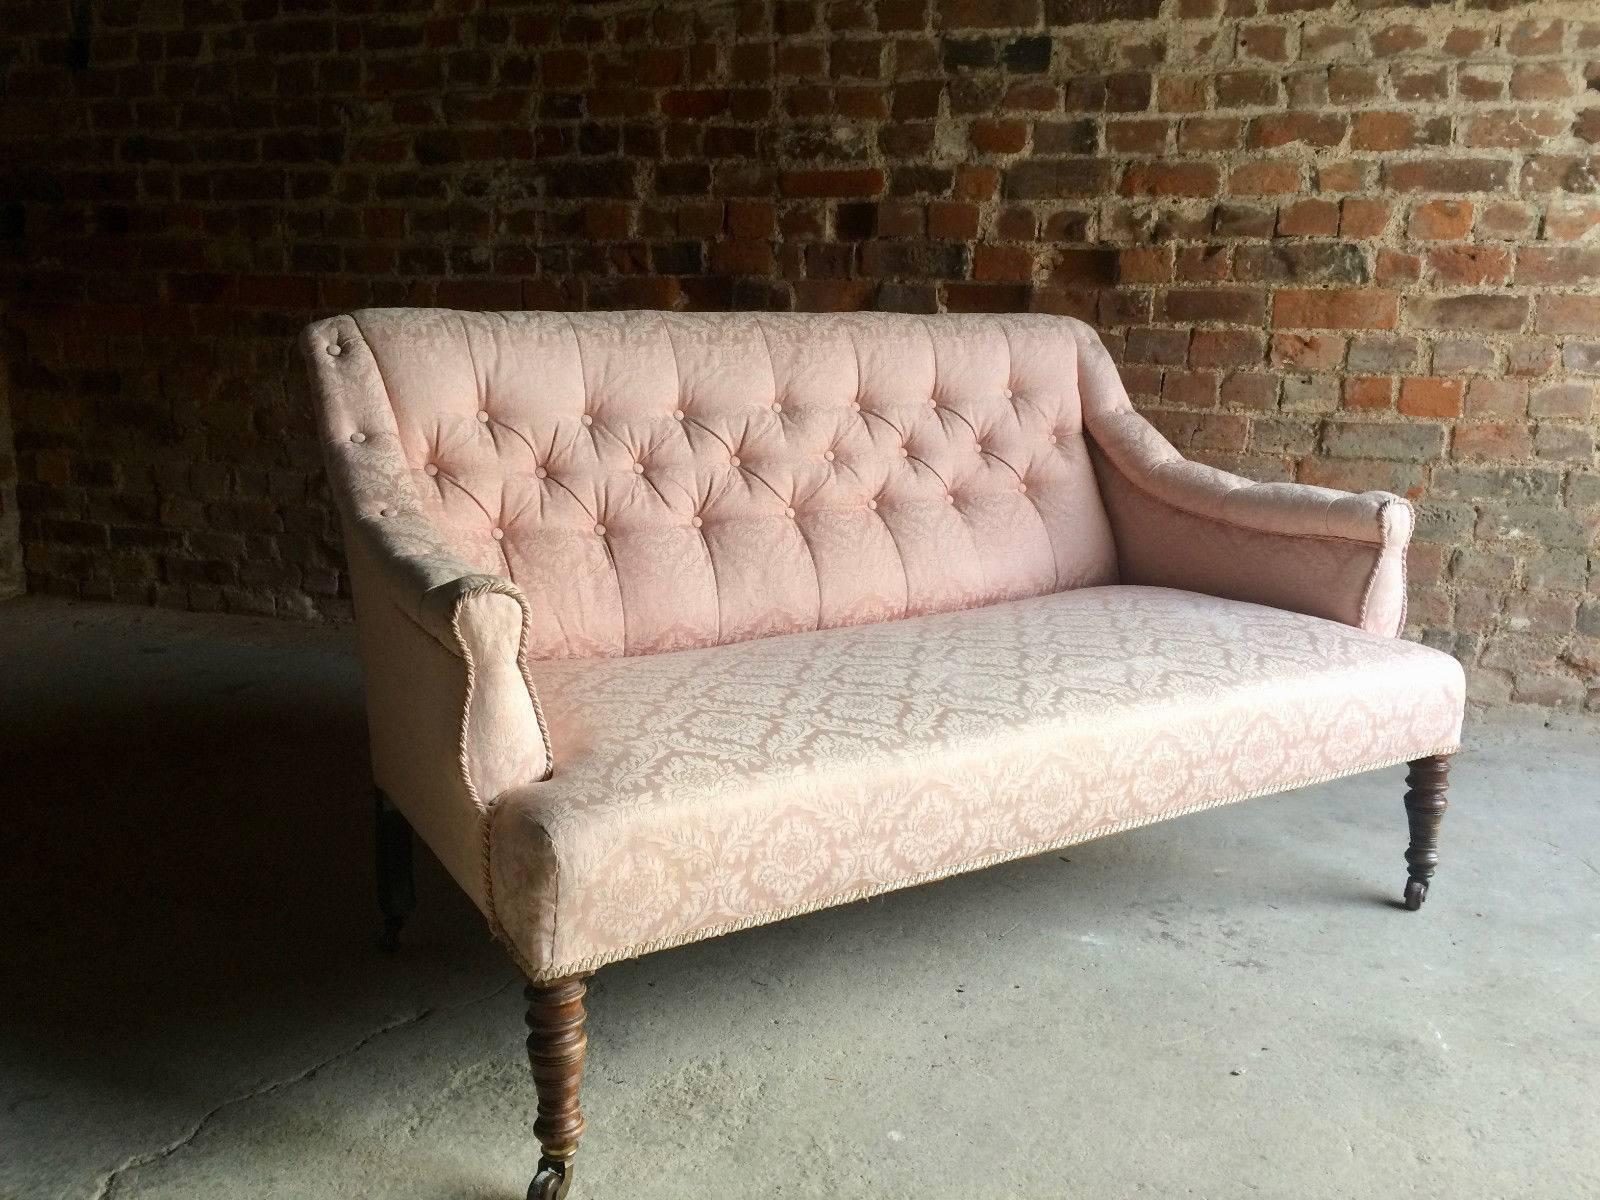 Mahogany Antique Sofa Settee Chesterfield Button Back 19th Century Victorian Pink Casters